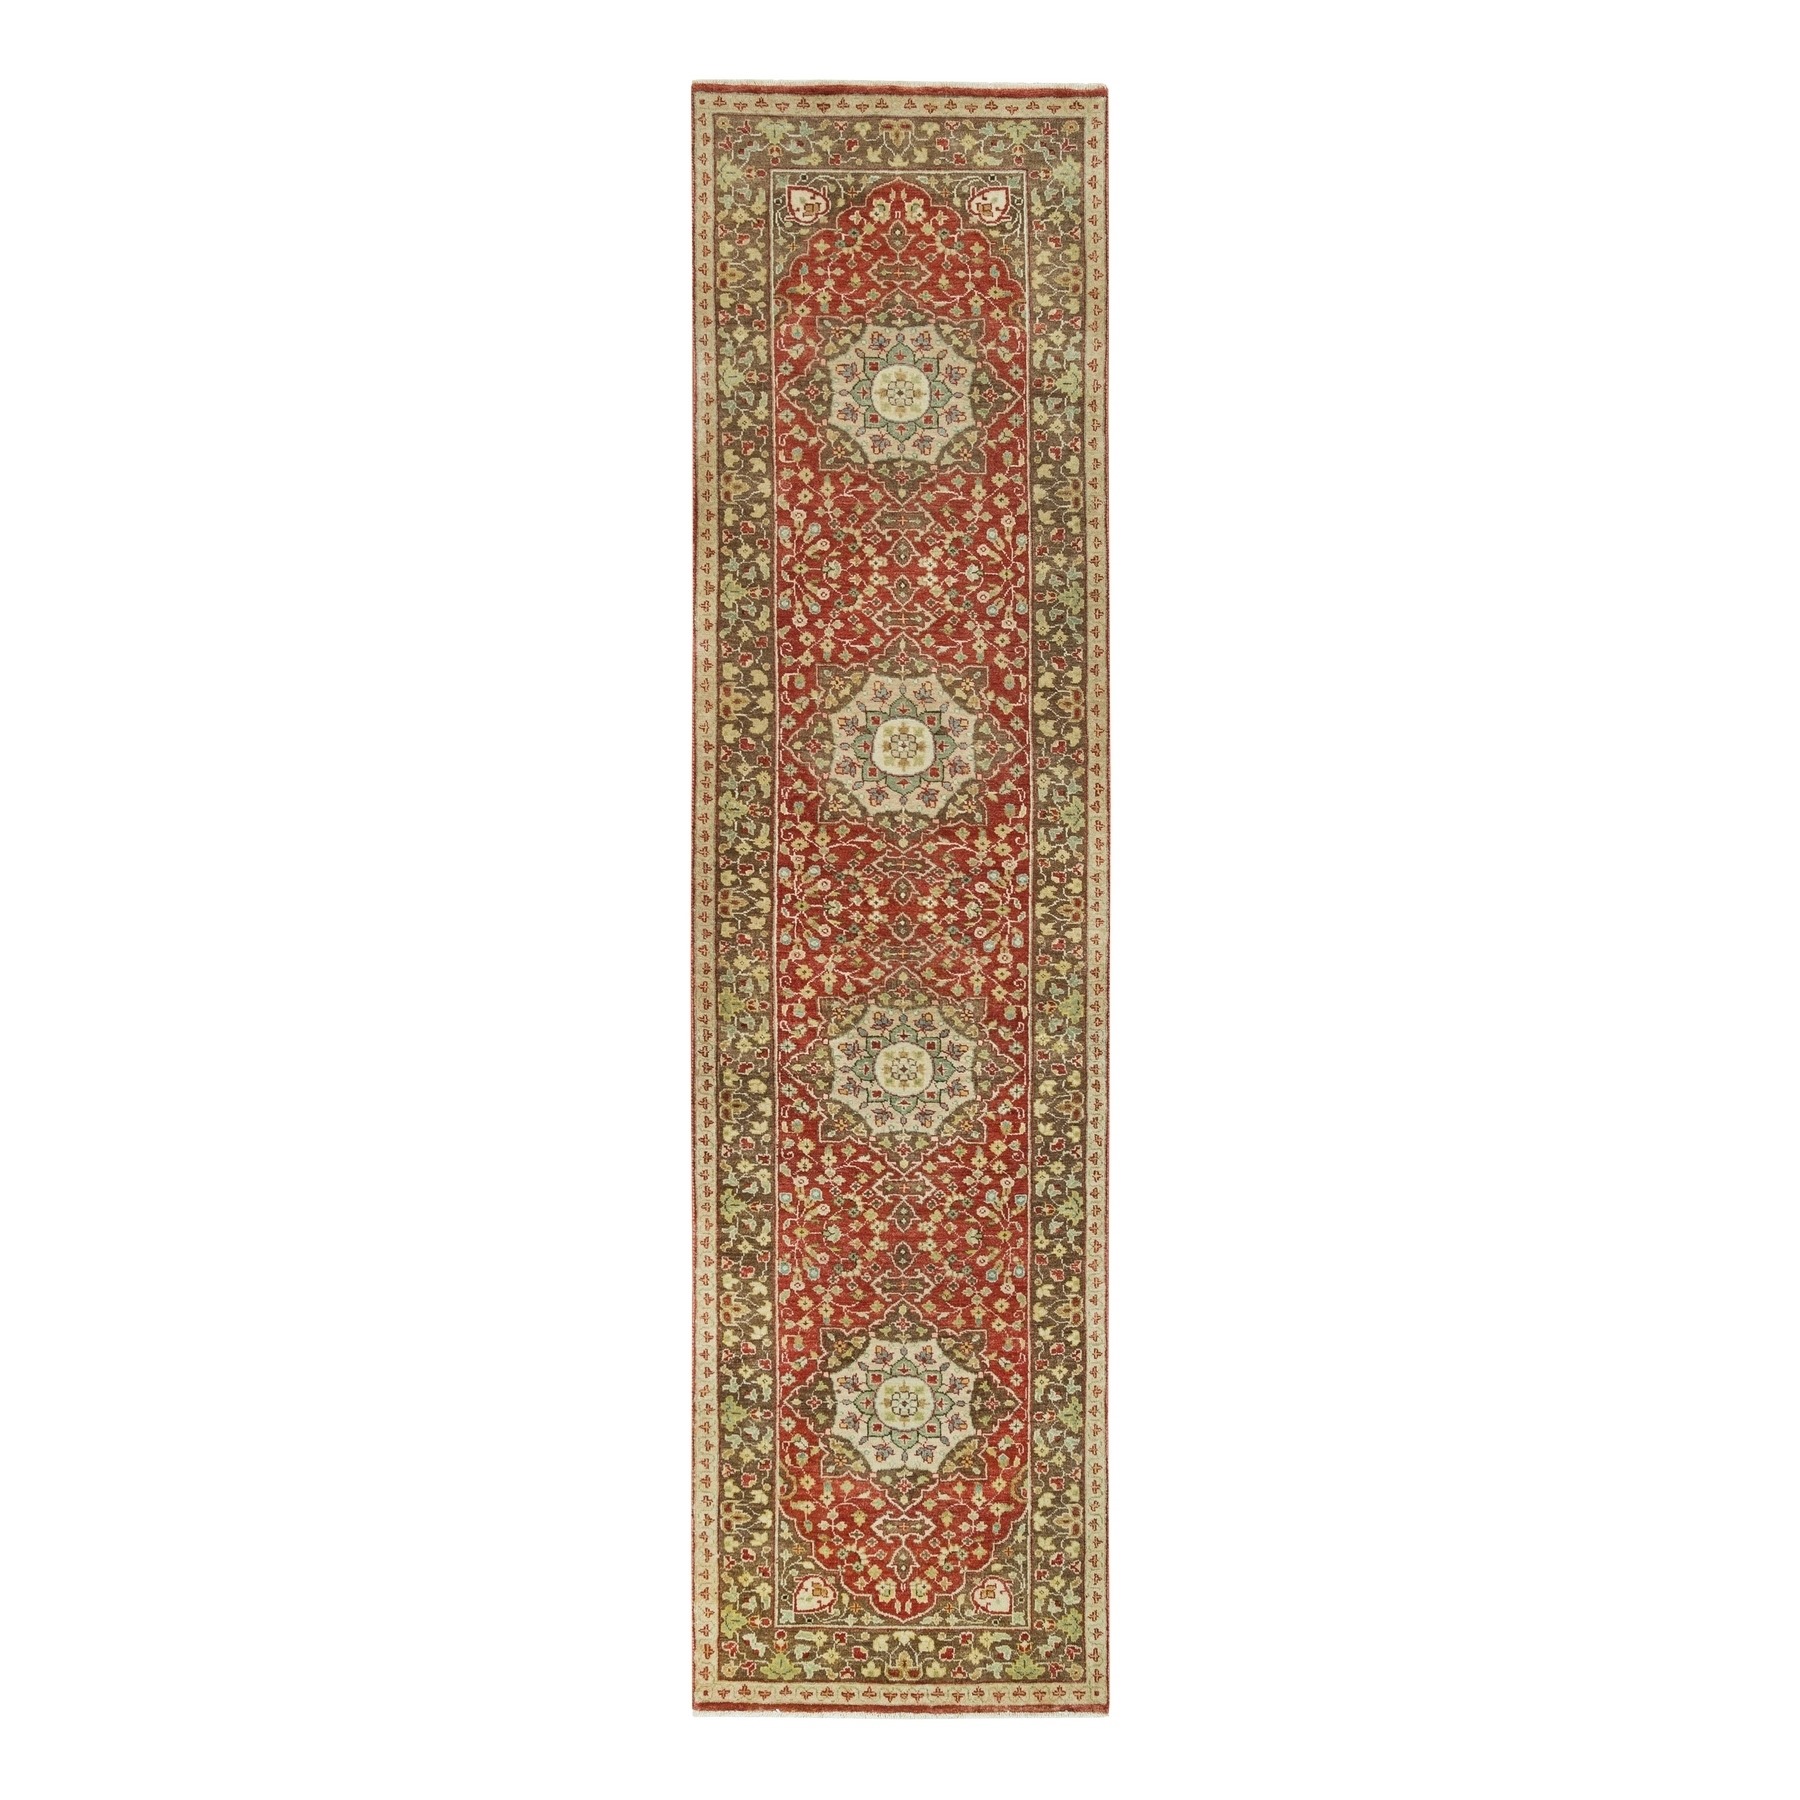 2'6"x10'1" Venetian Red and Heavy Brown, Plush and Lush Pile, Vegetable Dyes, Antiqued Tabriz Haji Jalili Design, Hand Woven, Extra Soft Wool, Fine Weave, Runner Oriental Rug 